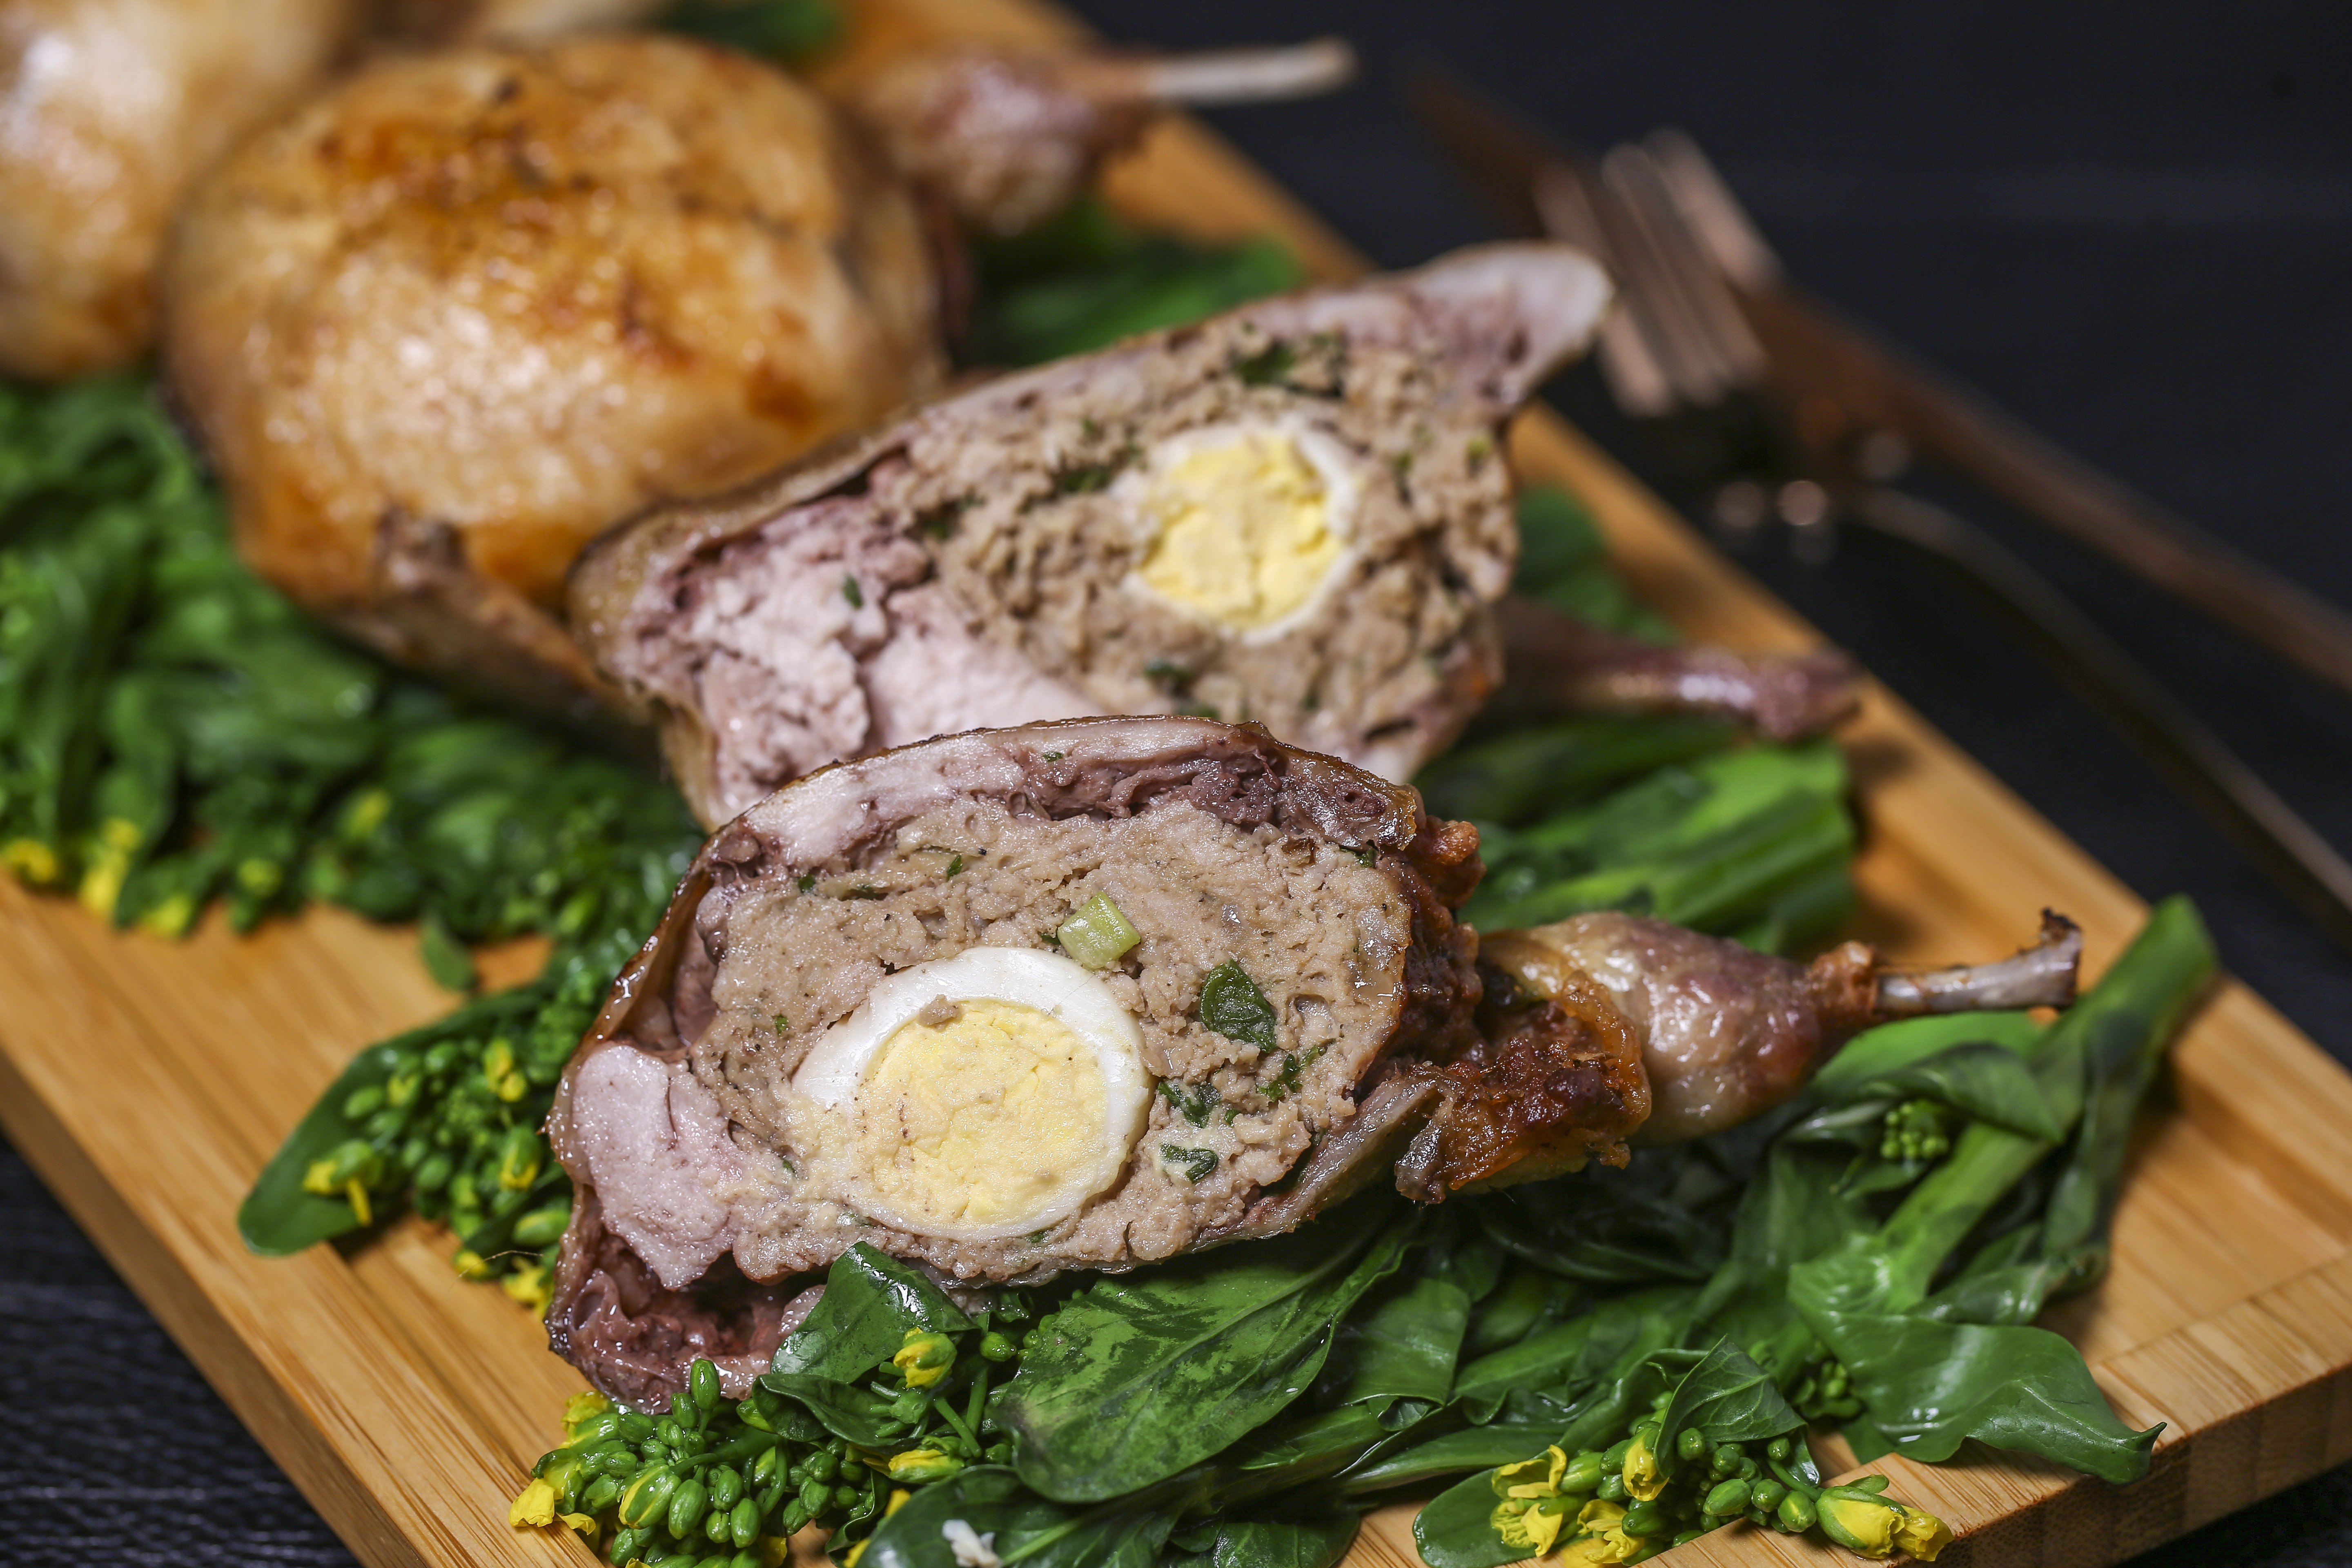 Susan Jung’s tunnel-boned quails with Chinese sausage stuffing and quail eggs. Photography: Jonathan Wong. Styling: Nellie Ming Lee